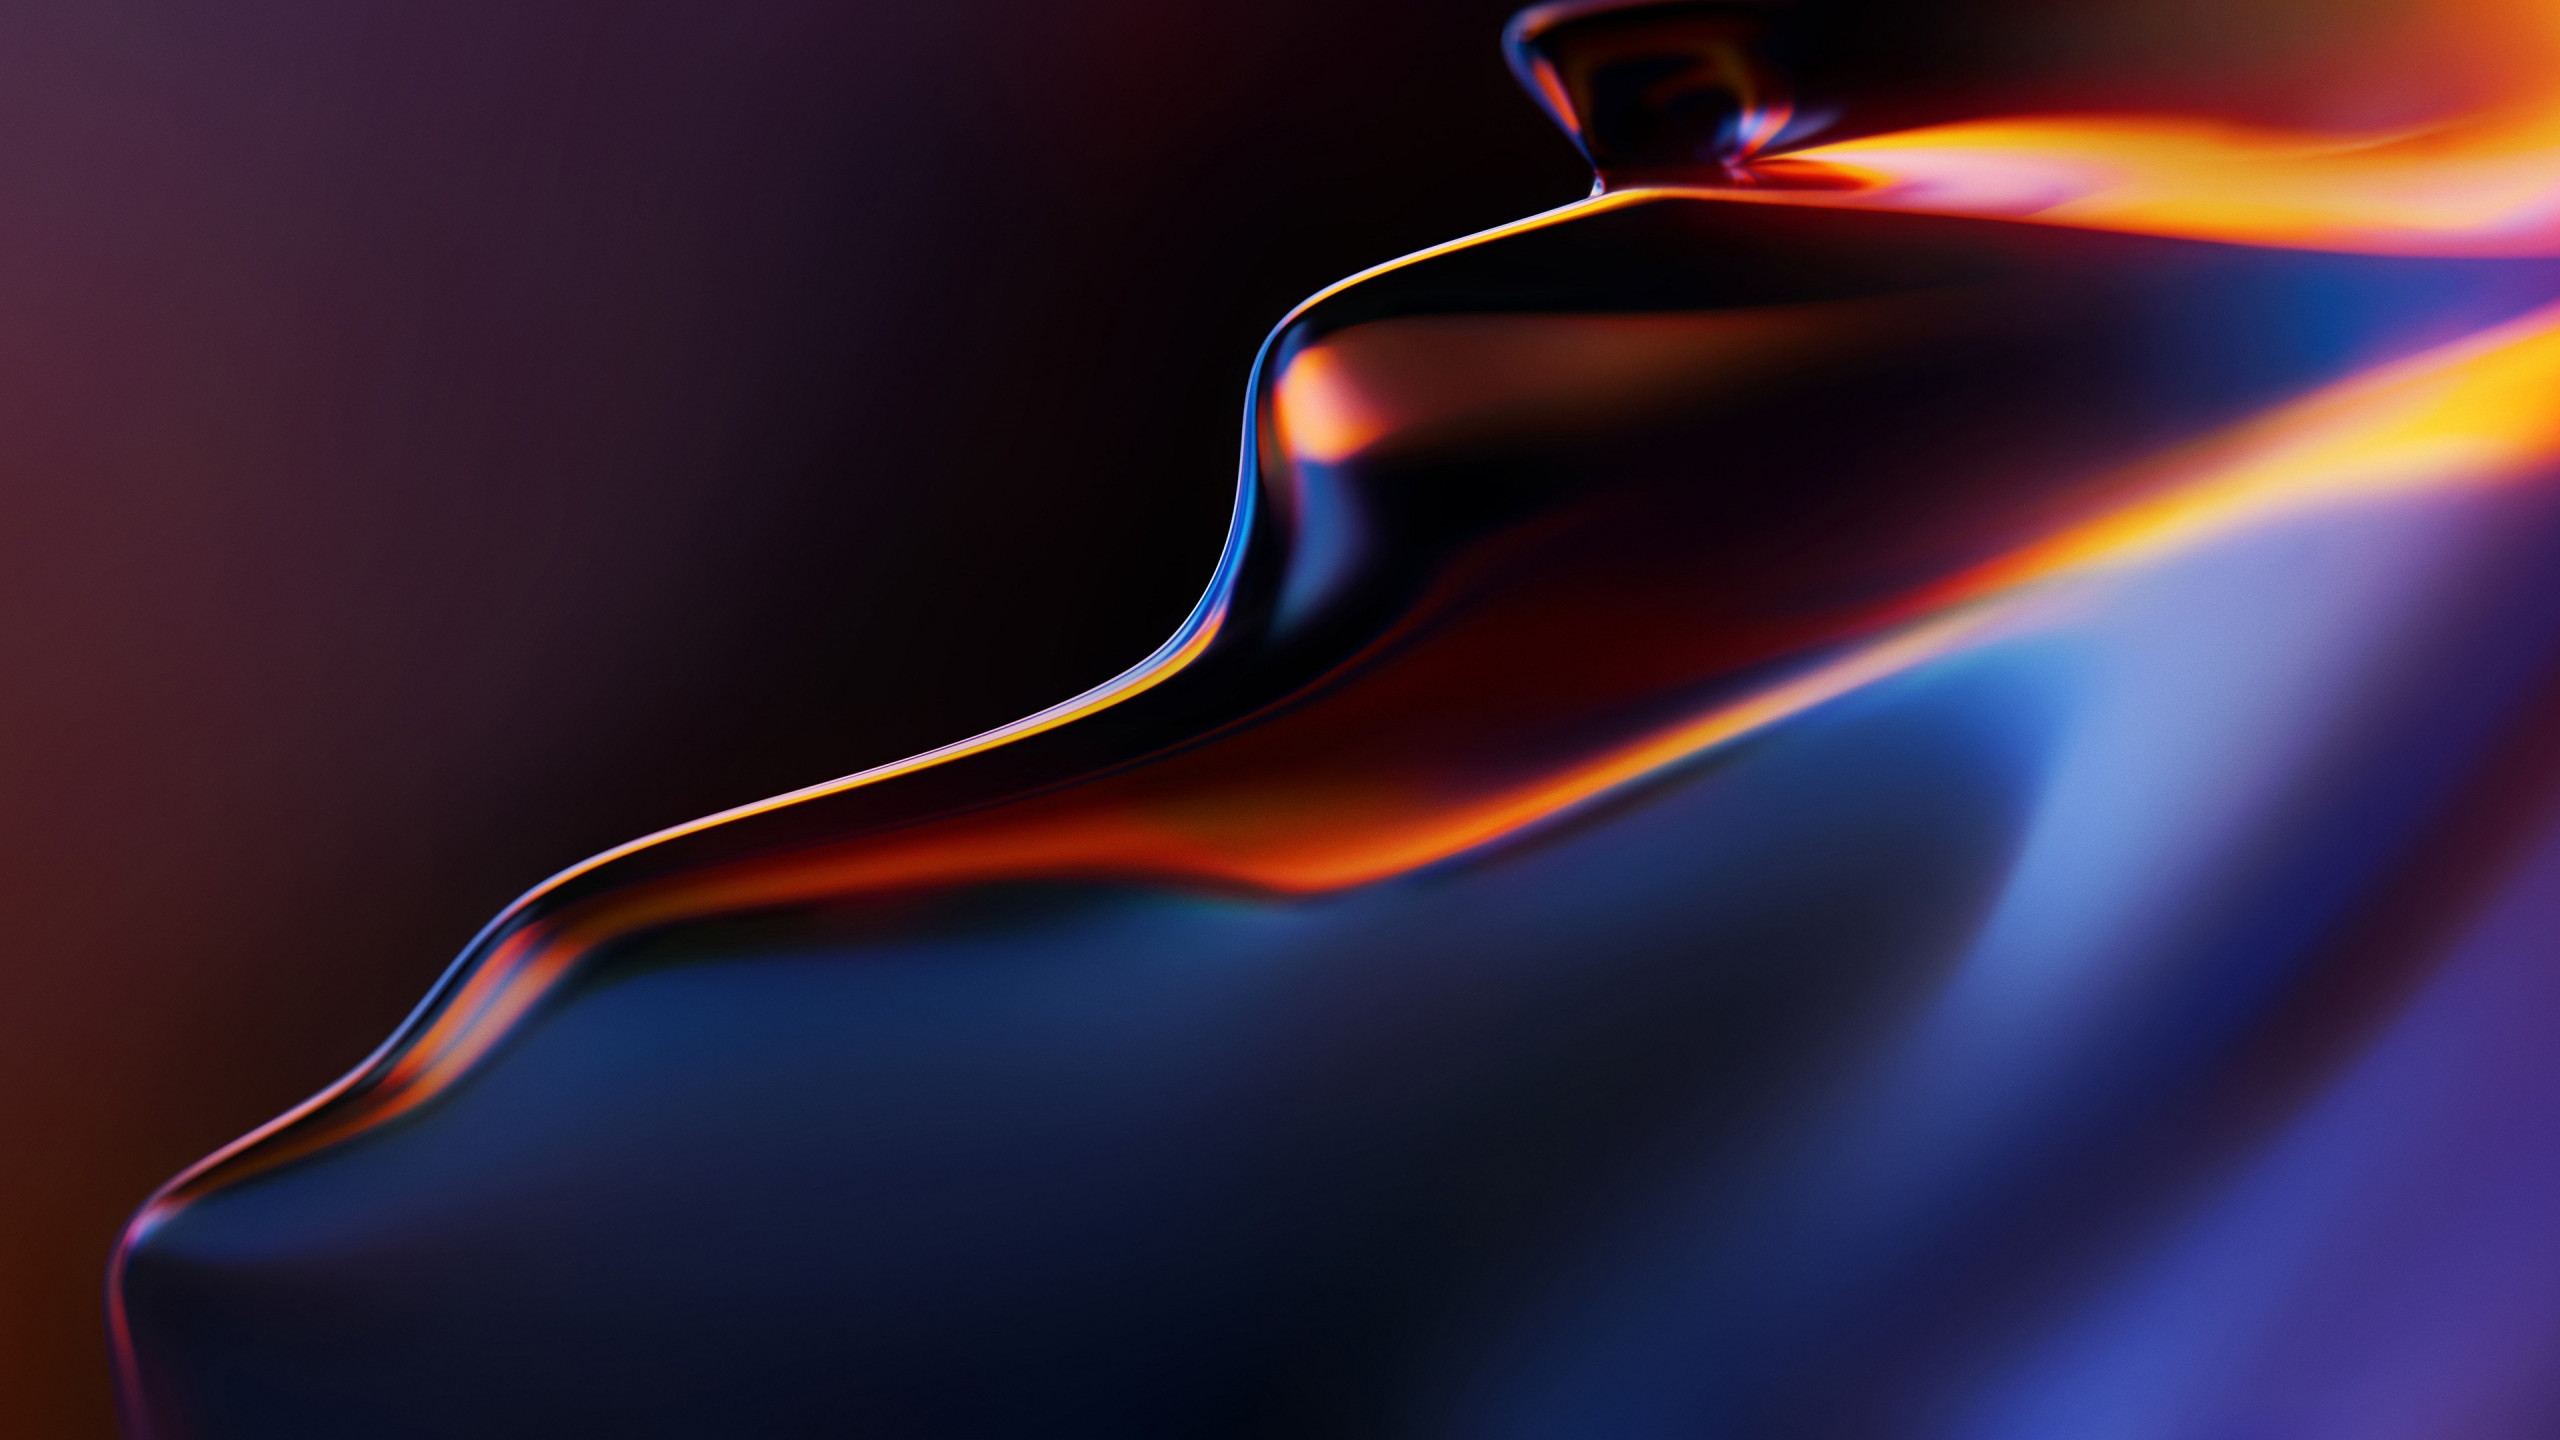 Abstract, flow, OnePlus 6T wallpaper 2560x1440